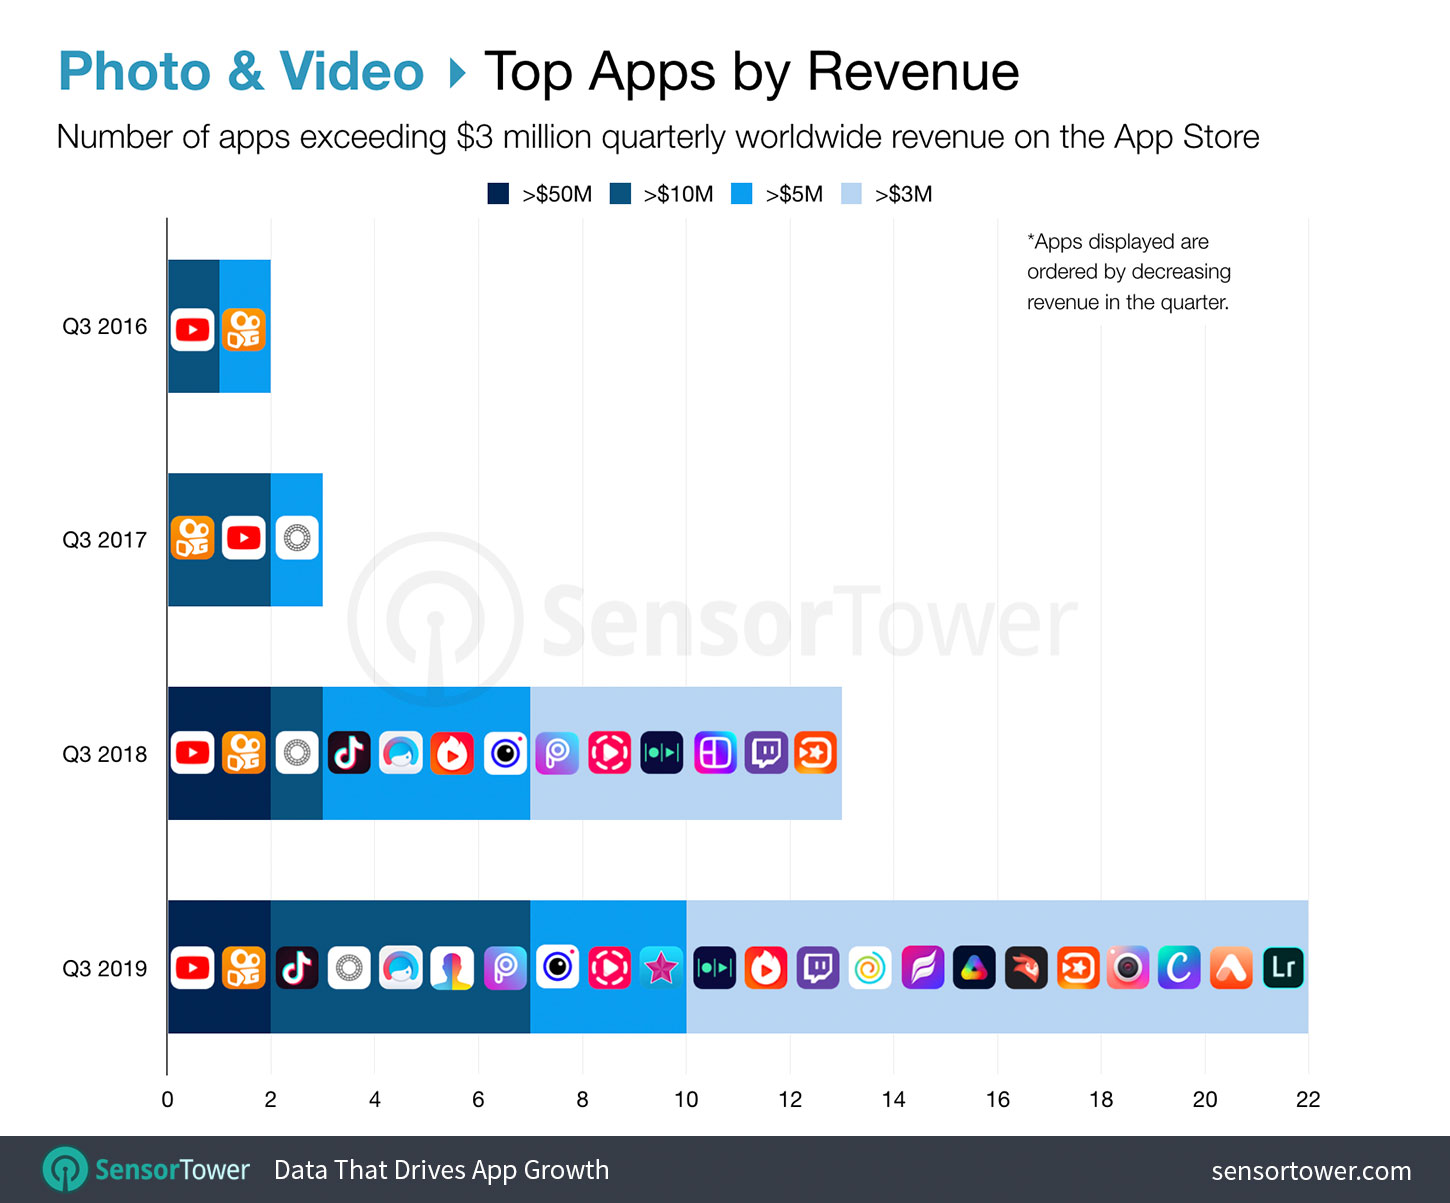 Top Grossing Photo & Video Apps on the App Store Worldwide for Q3 2019